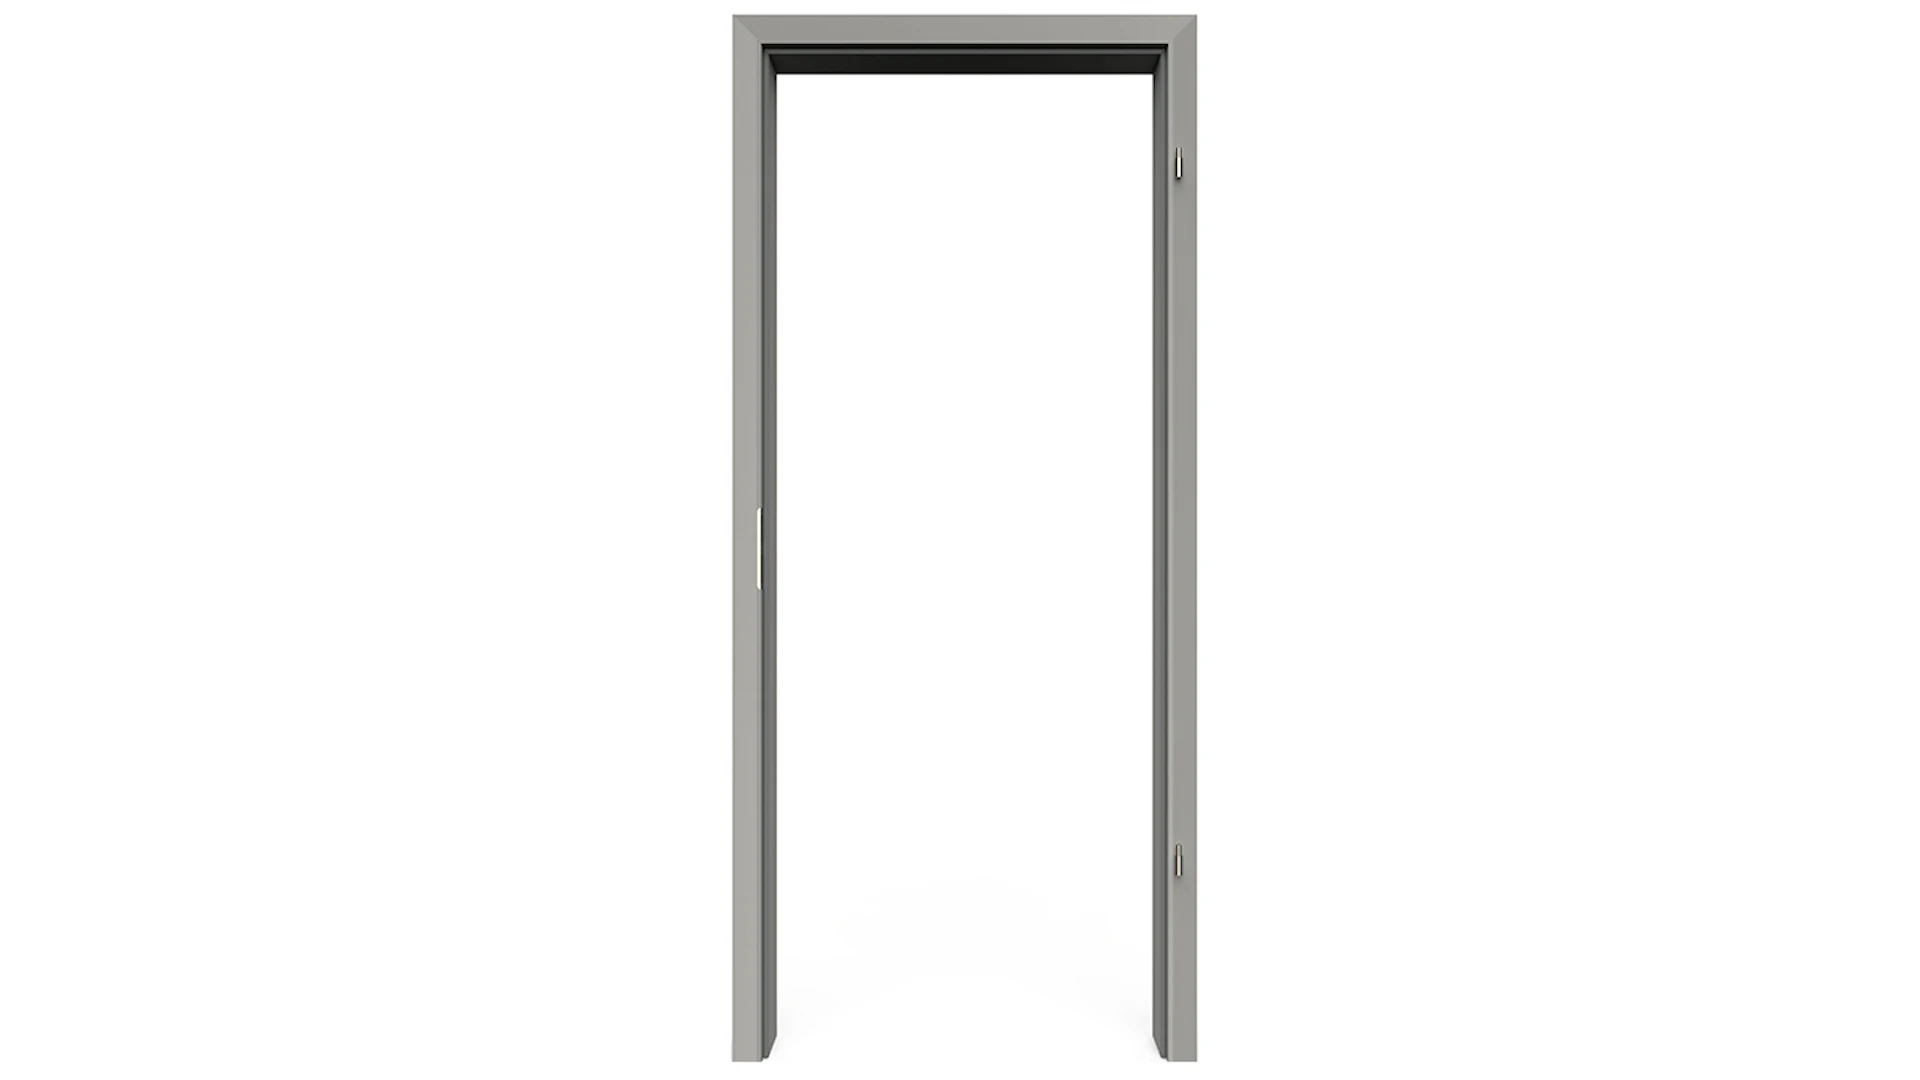 planeo Standard Door frame, rounded edge - CPL Silver grey - 2110 x 735 x 310 mm DIN Right